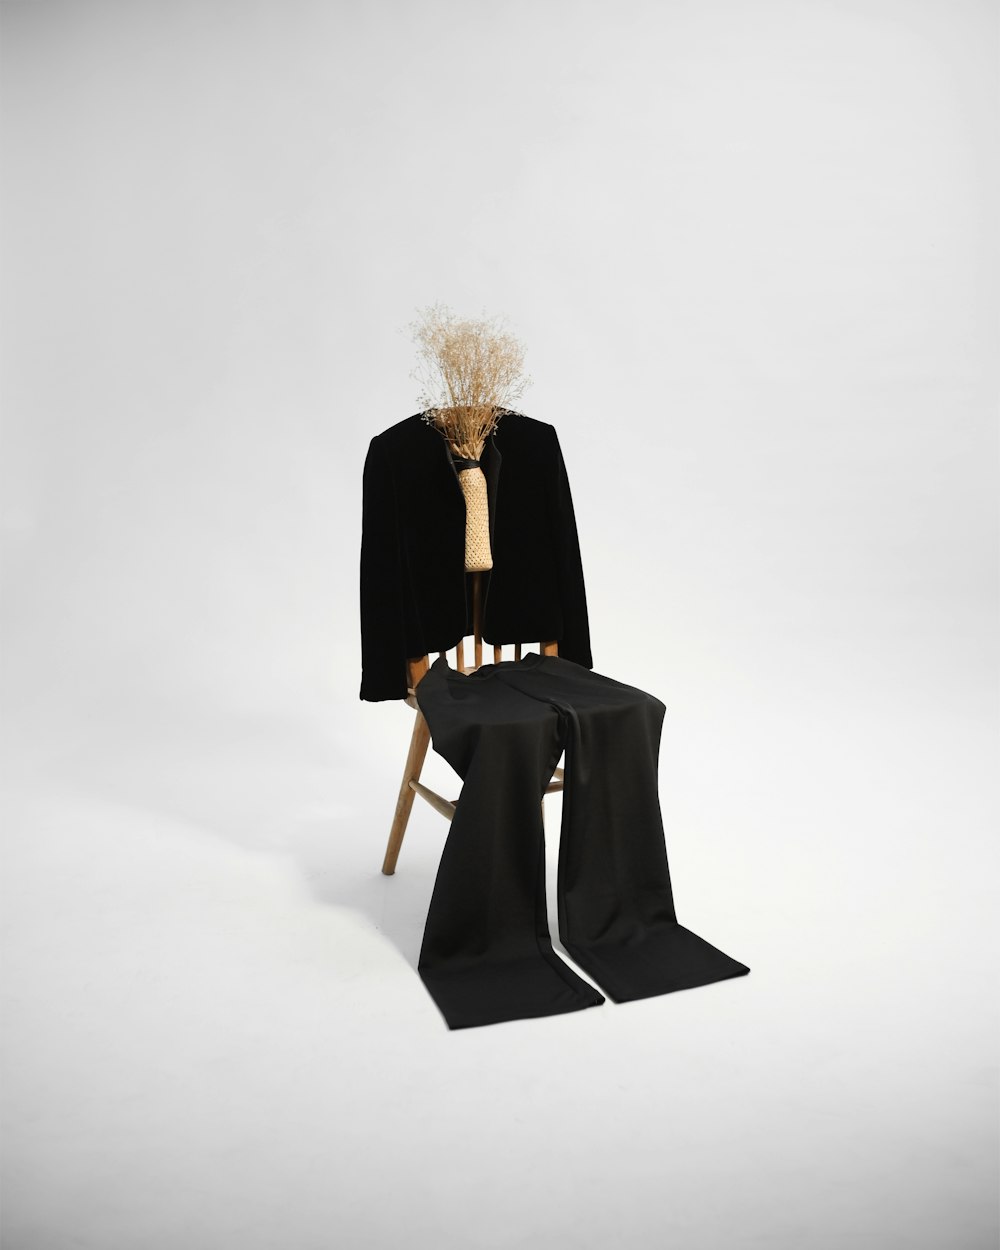 woman in black coat sitting on brown wooden chair